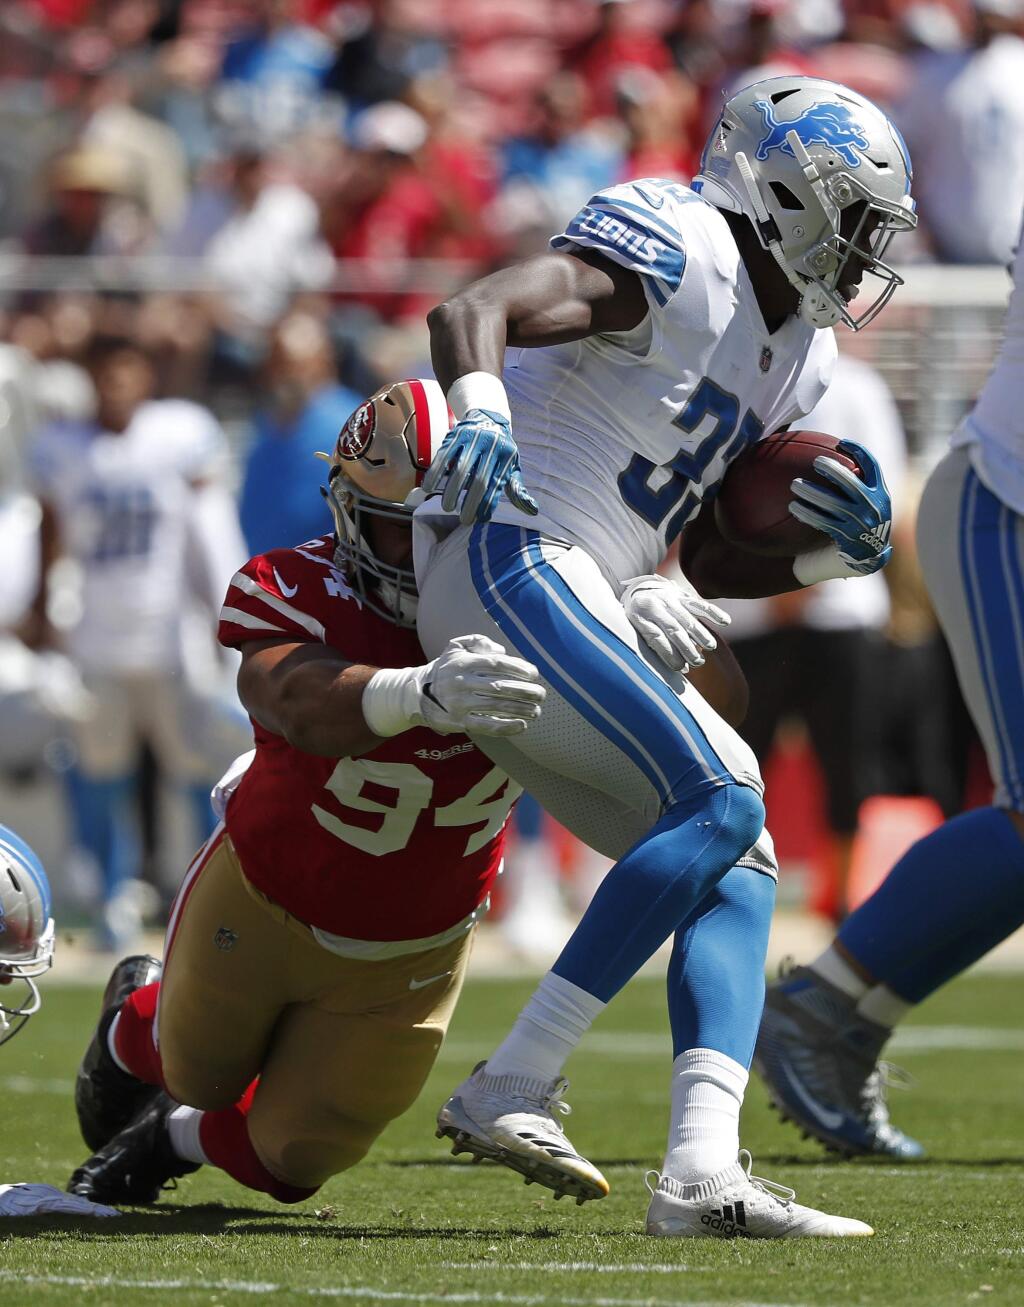 Detroit Lions running back Kerryon Johnson, right, runs with the ball against San Francisco 49ers defensive end Solomon Thomas during the first half in Santa Clara, Sunday, Sept. 16, 2018. (AP Photo/Tony Avelar)